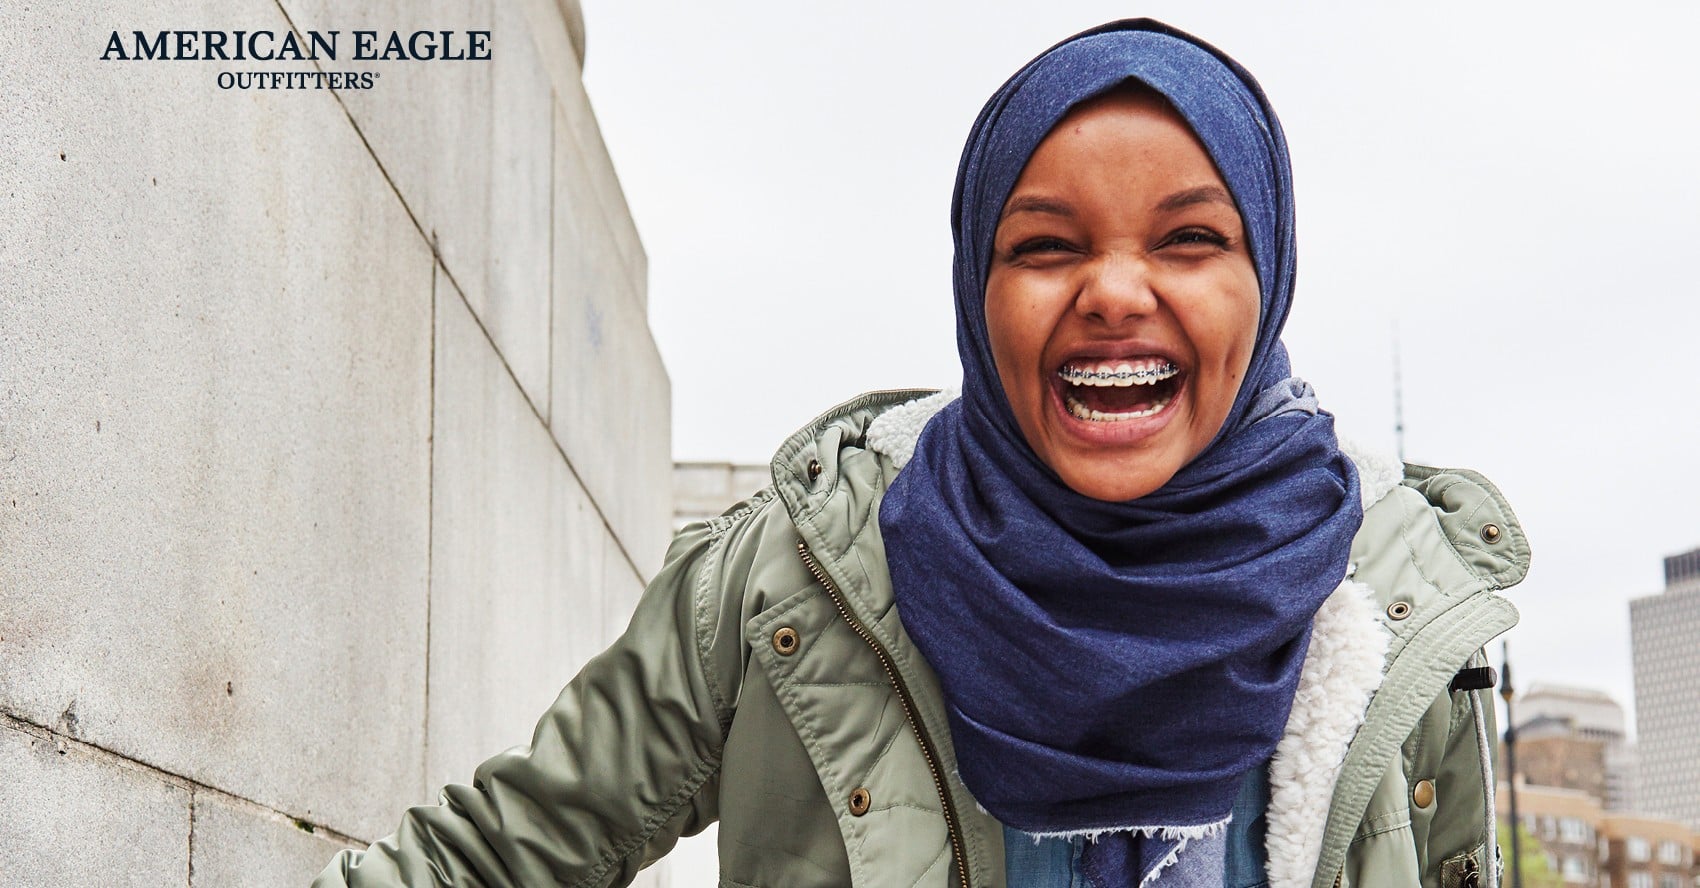 American Eagle features untouched models - Upworthy